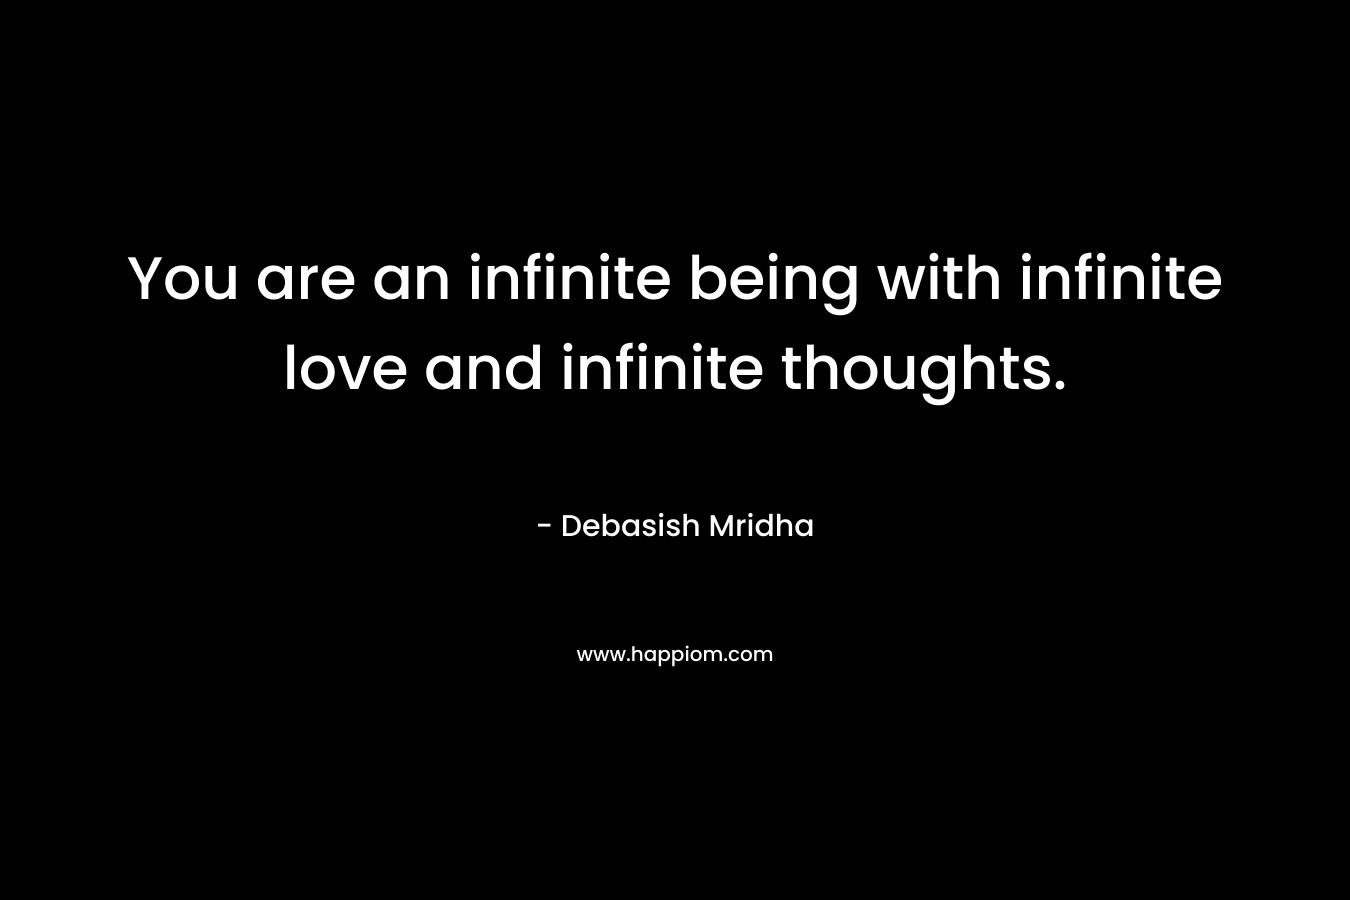 You are an infinite being with infinite love and infinite thoughts.